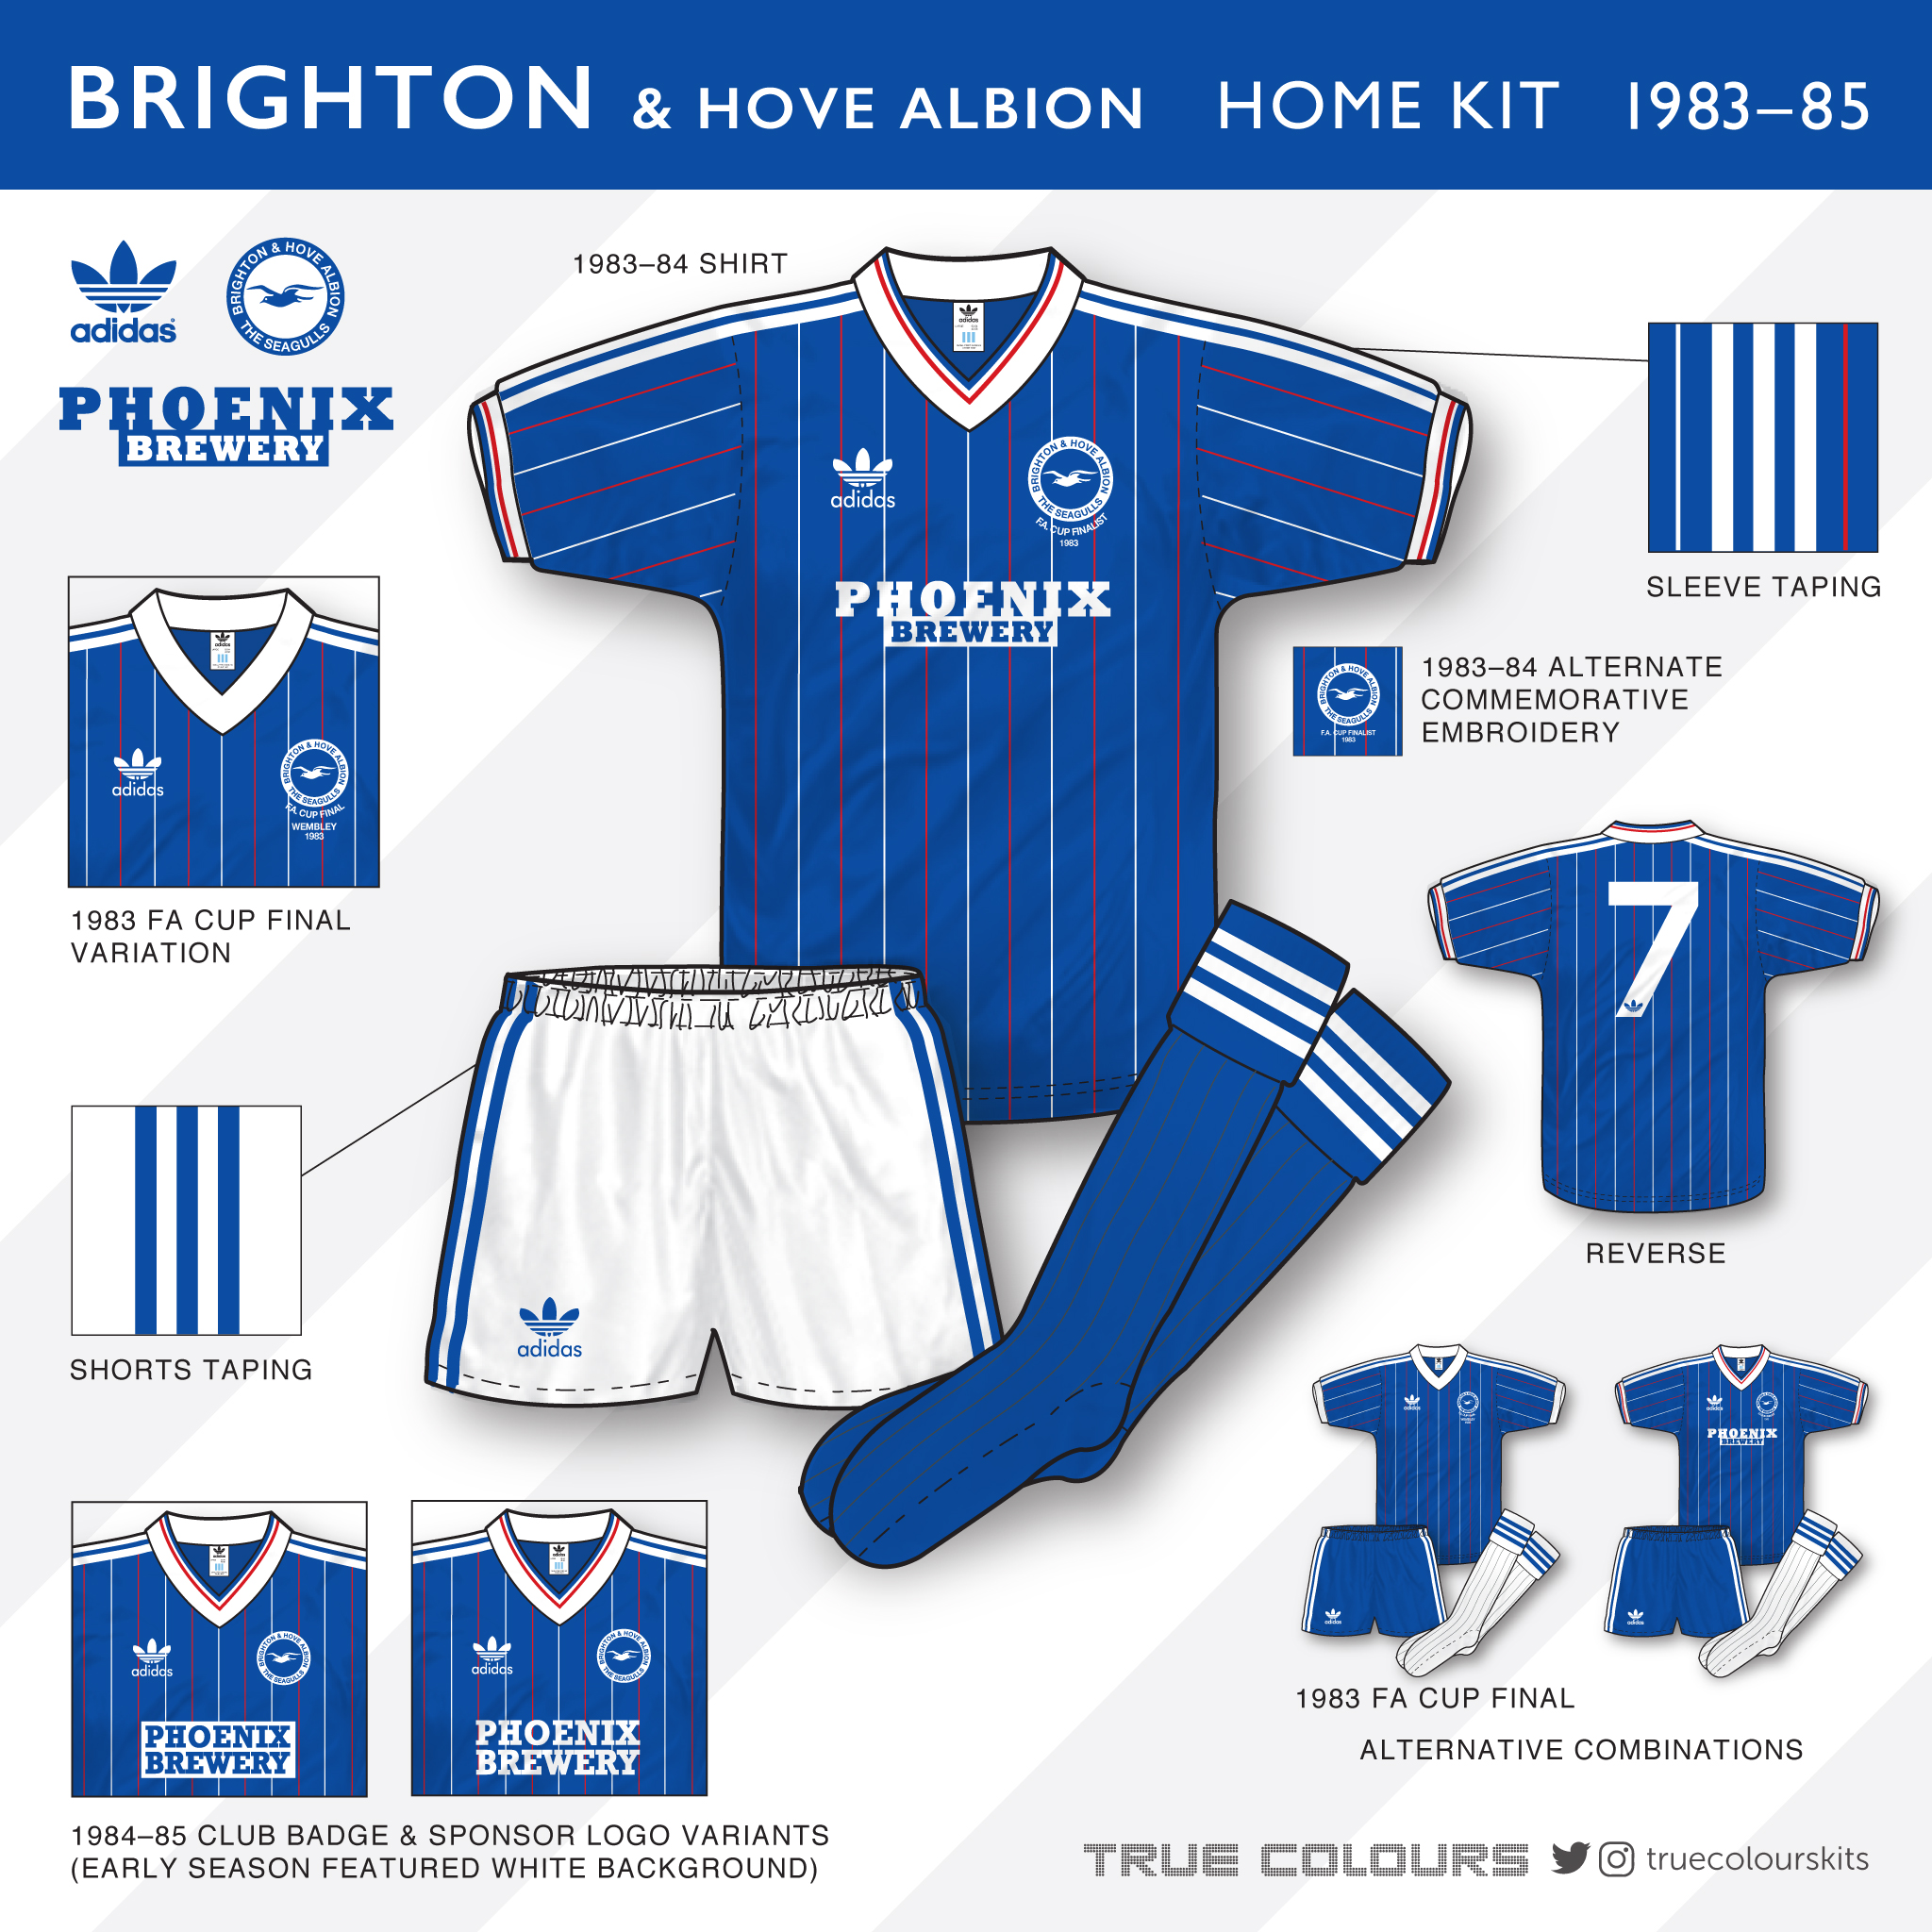 John Devlin on Twitter: "An in-depth look Brighton's 1983–85 adidas home kit. Premiered in the 1983 FA Cup Final (minus v-neck &amp; cuff trim) the shirt was updated 2nd